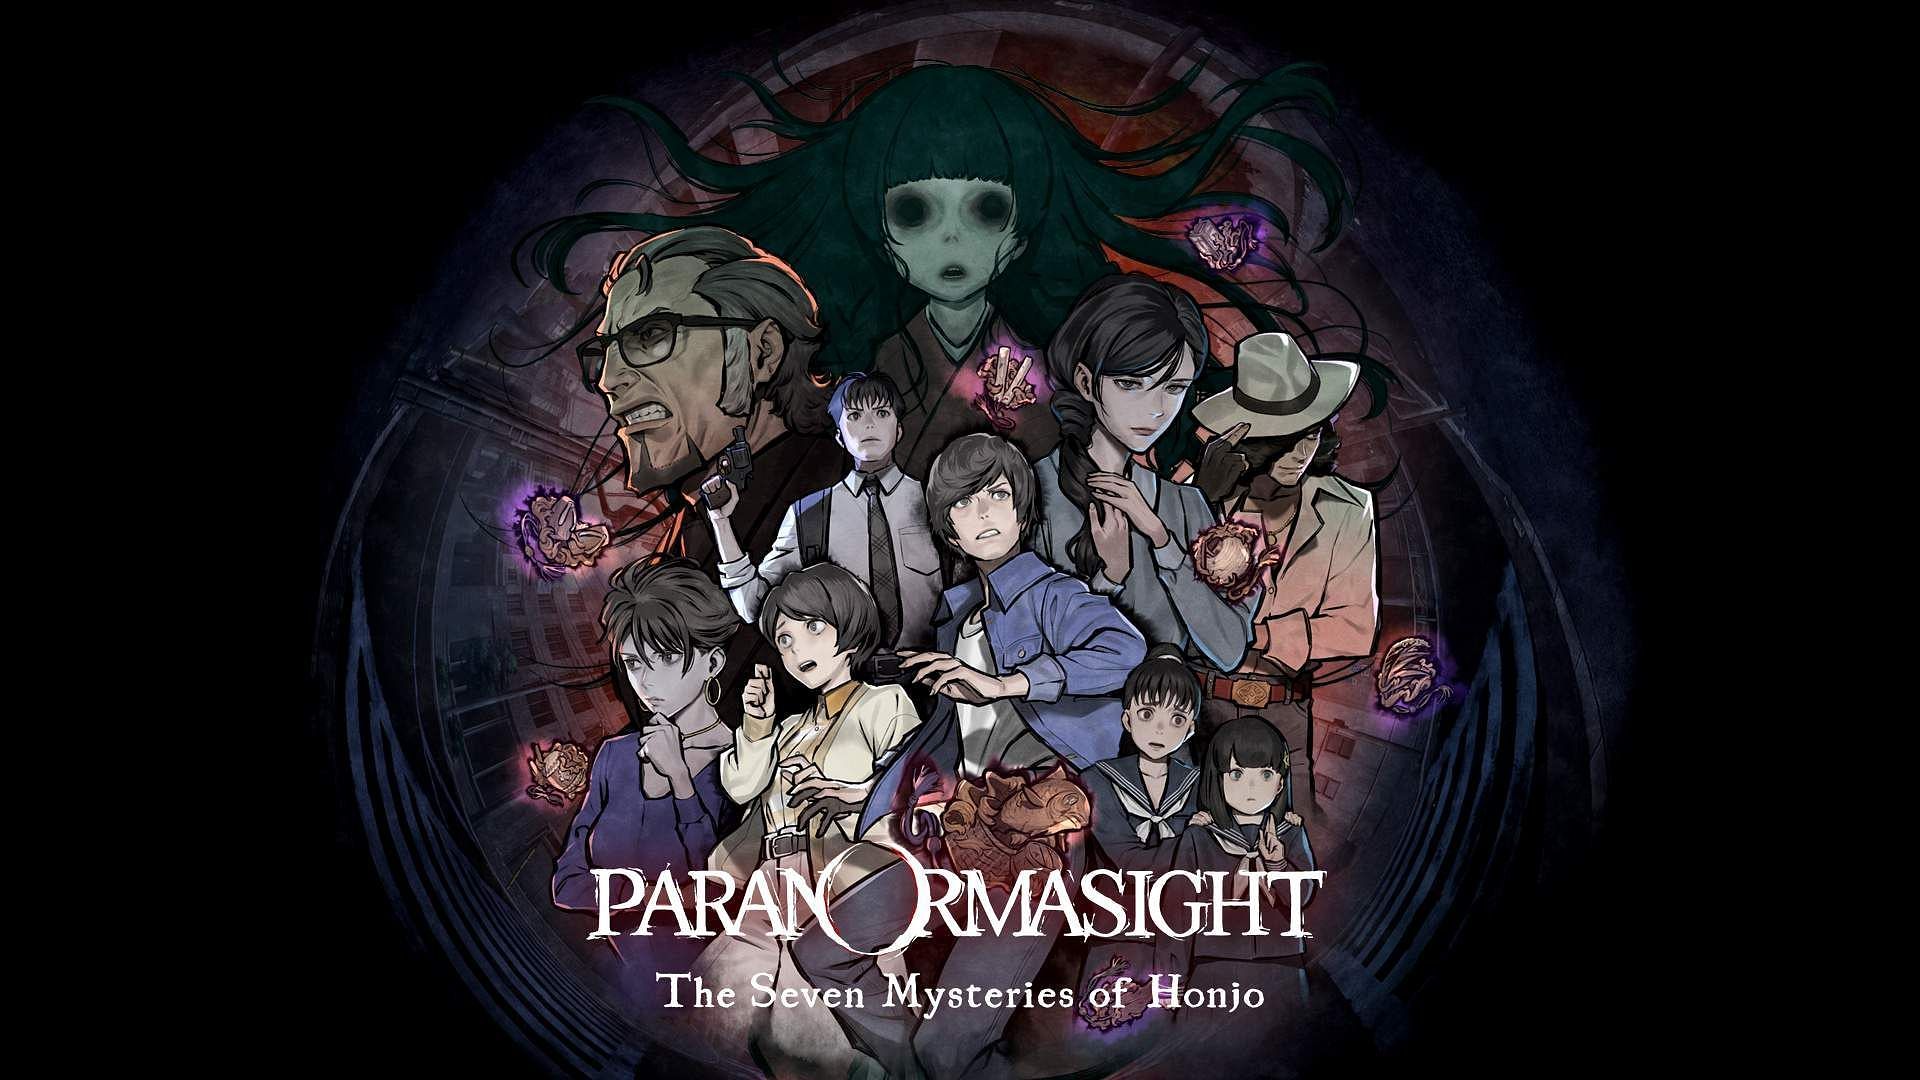 Paranormasight - The Seven Mysteries of Honjo review (Image via Square Enix)